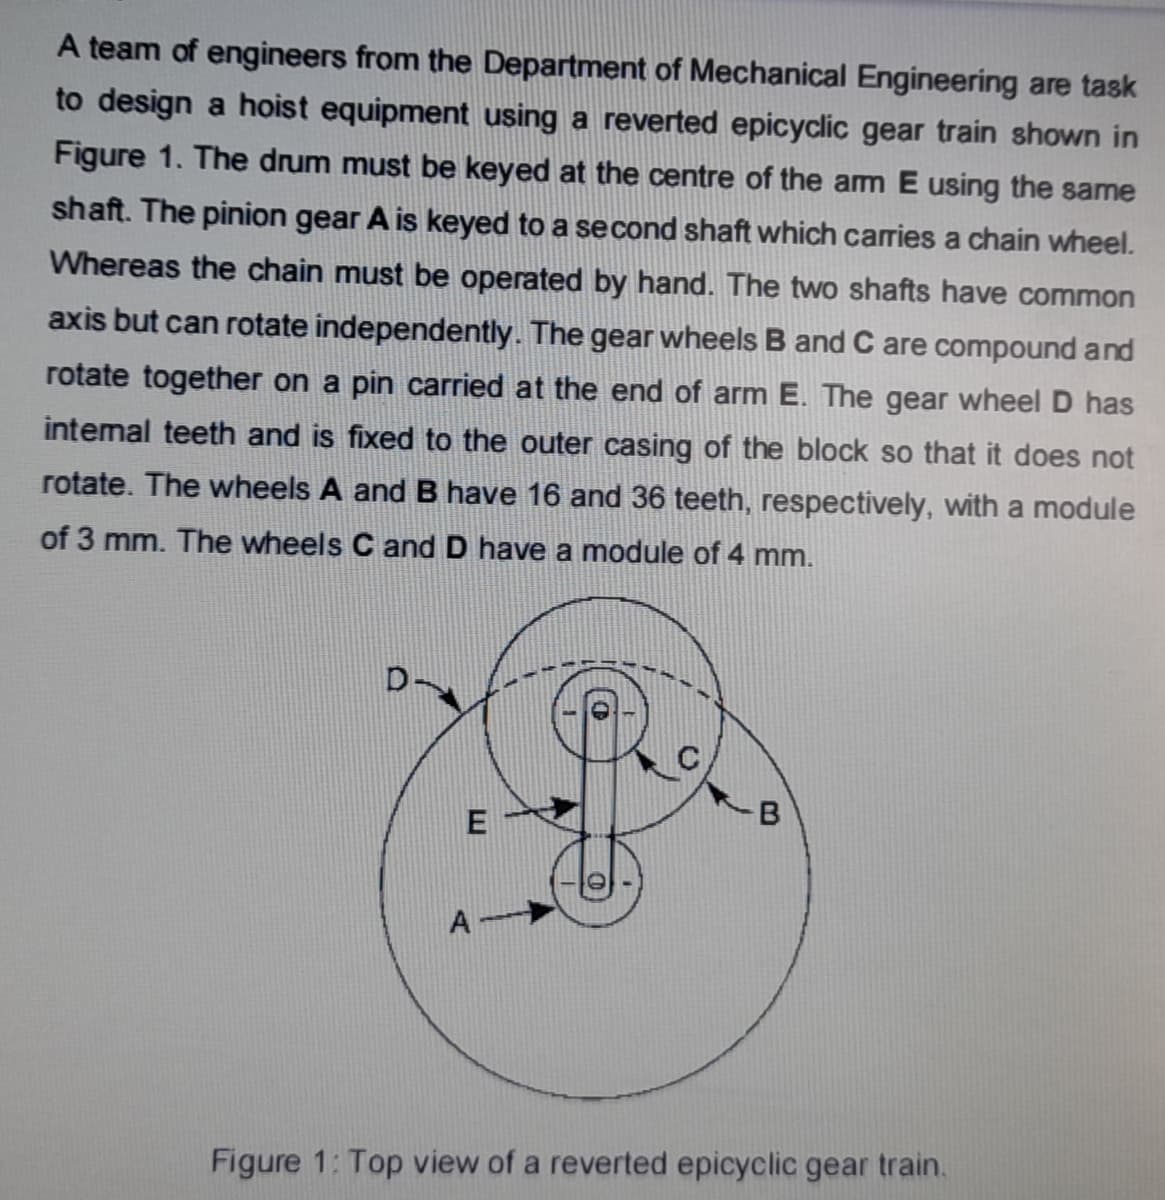 A team of engineers from the Department of Mechanical Engineering are task
to design a hoist equipment using a reverted epicyclic gear train shown in
Figure 1. The drum must be keyed at the centre of the am E using the same
shaft. The pinion gear A is keyed to a second shaft which carries a chain wheel.
Whereas the chain must be operated by hand. The two shafts have common
axis but can rotate independently. The gear wheels B and C are compound and
rotate together on a pin carried at the end of arm E. The gear wheel D has
intemal teeth and is fixed to the outer casing of the block so that it does not
rotate. The wheels A and B have 16 and 36 teeth, respectively, with a module
of 3 mm. The wheels C and D have a module of 4 mm.
B
E
A
Figure 1: Top view of a reverted epicyclic gear train.
